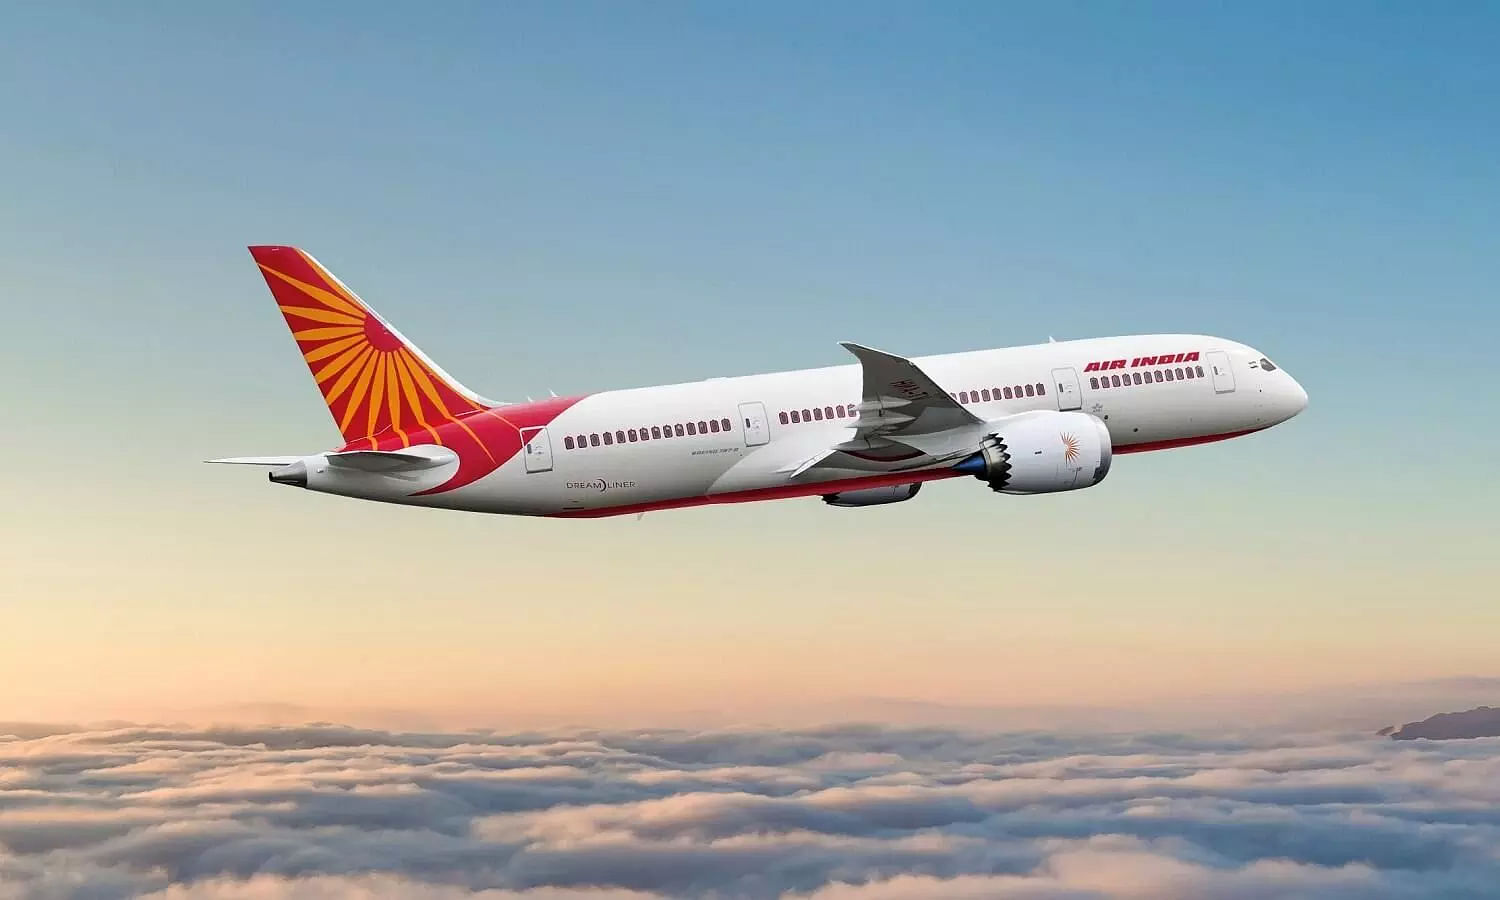 Air India to lease 12 more aircraft to enhance operations